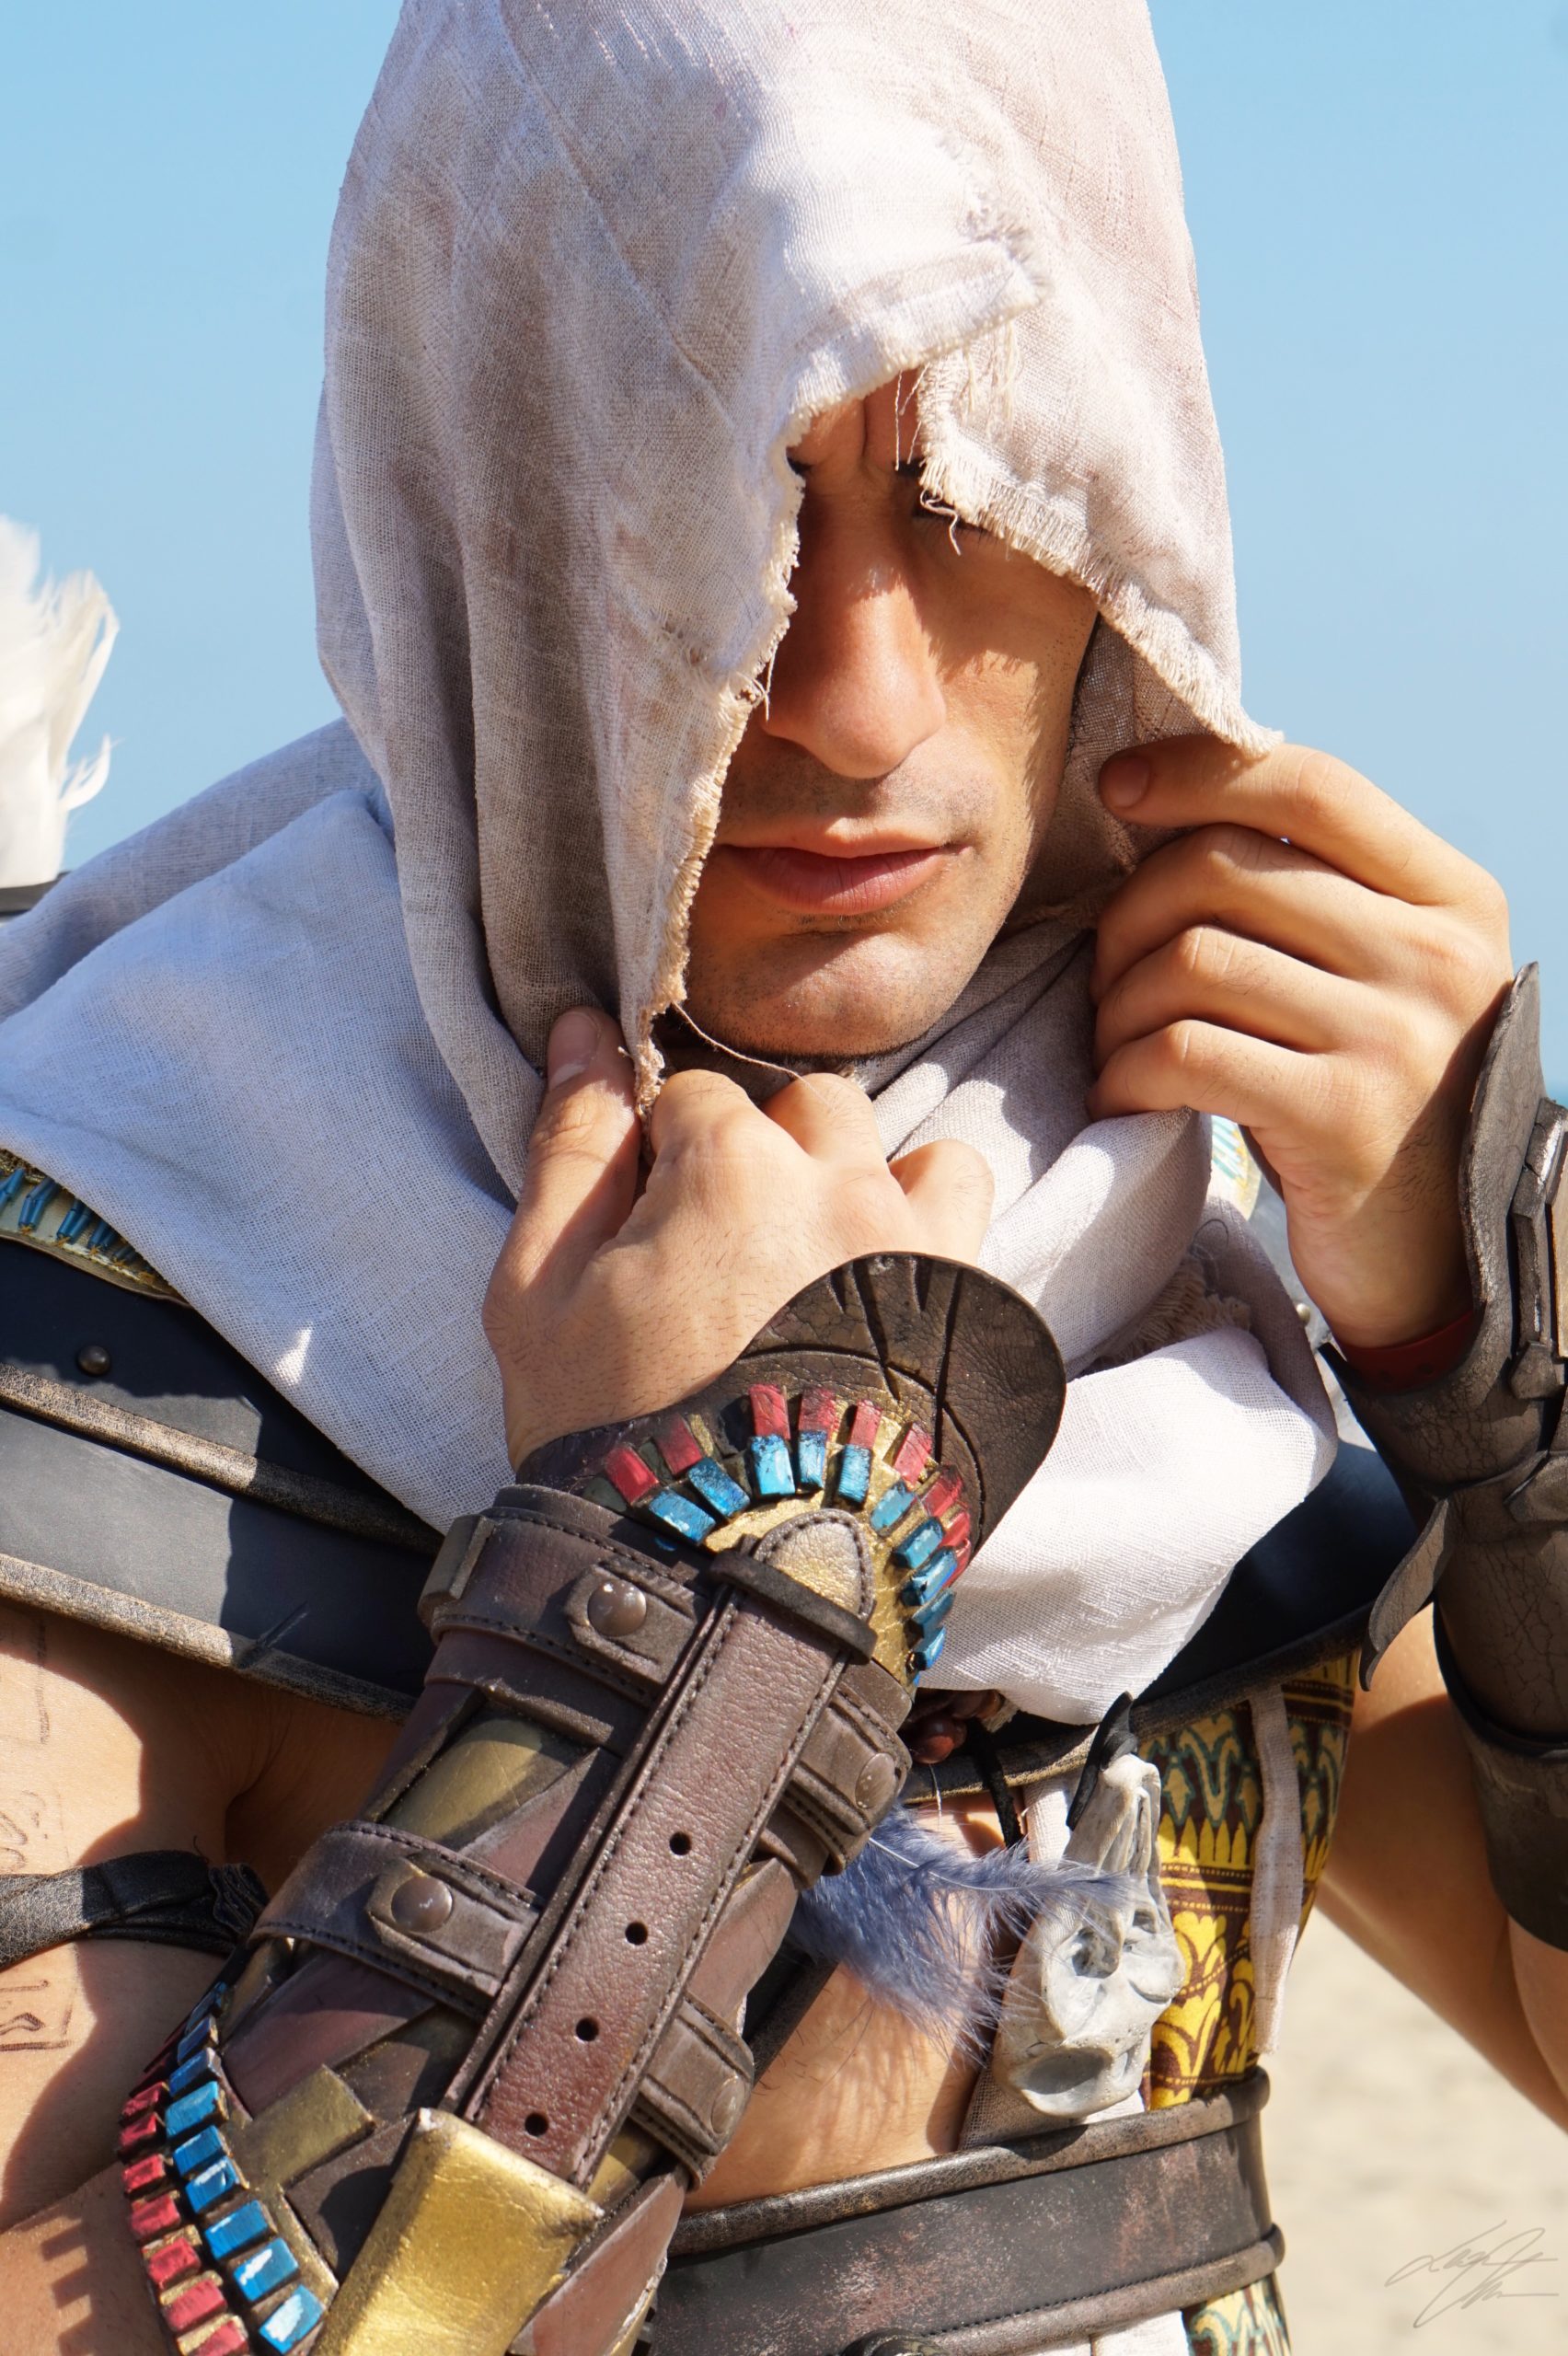 Assassin’s Creed Cosplay May As Well Be A Screenshot